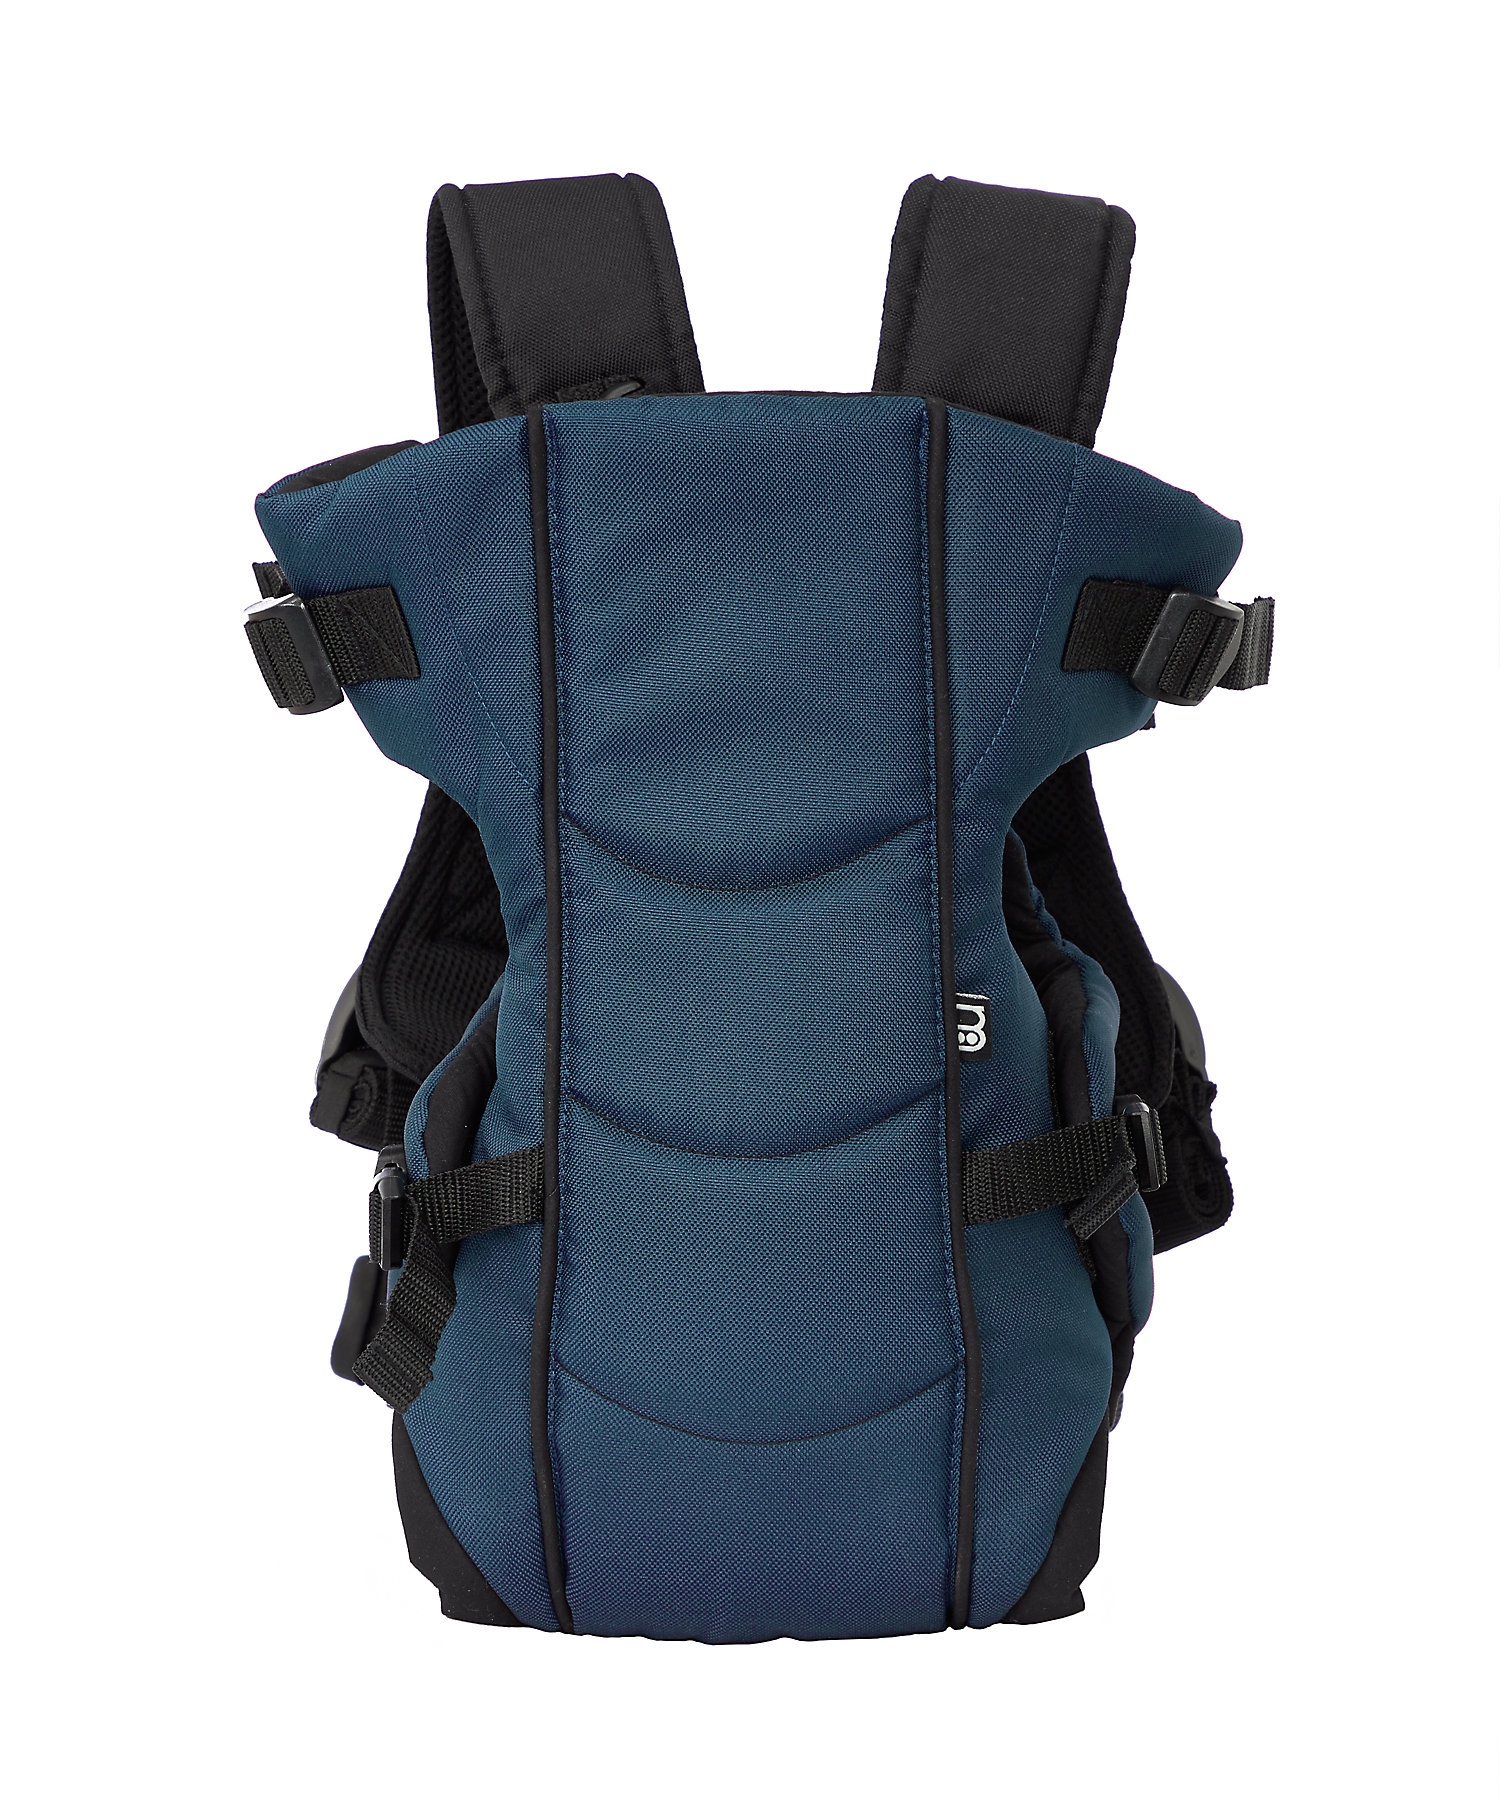 Mothercare | Mothercare 3 Position  Baby Carrier